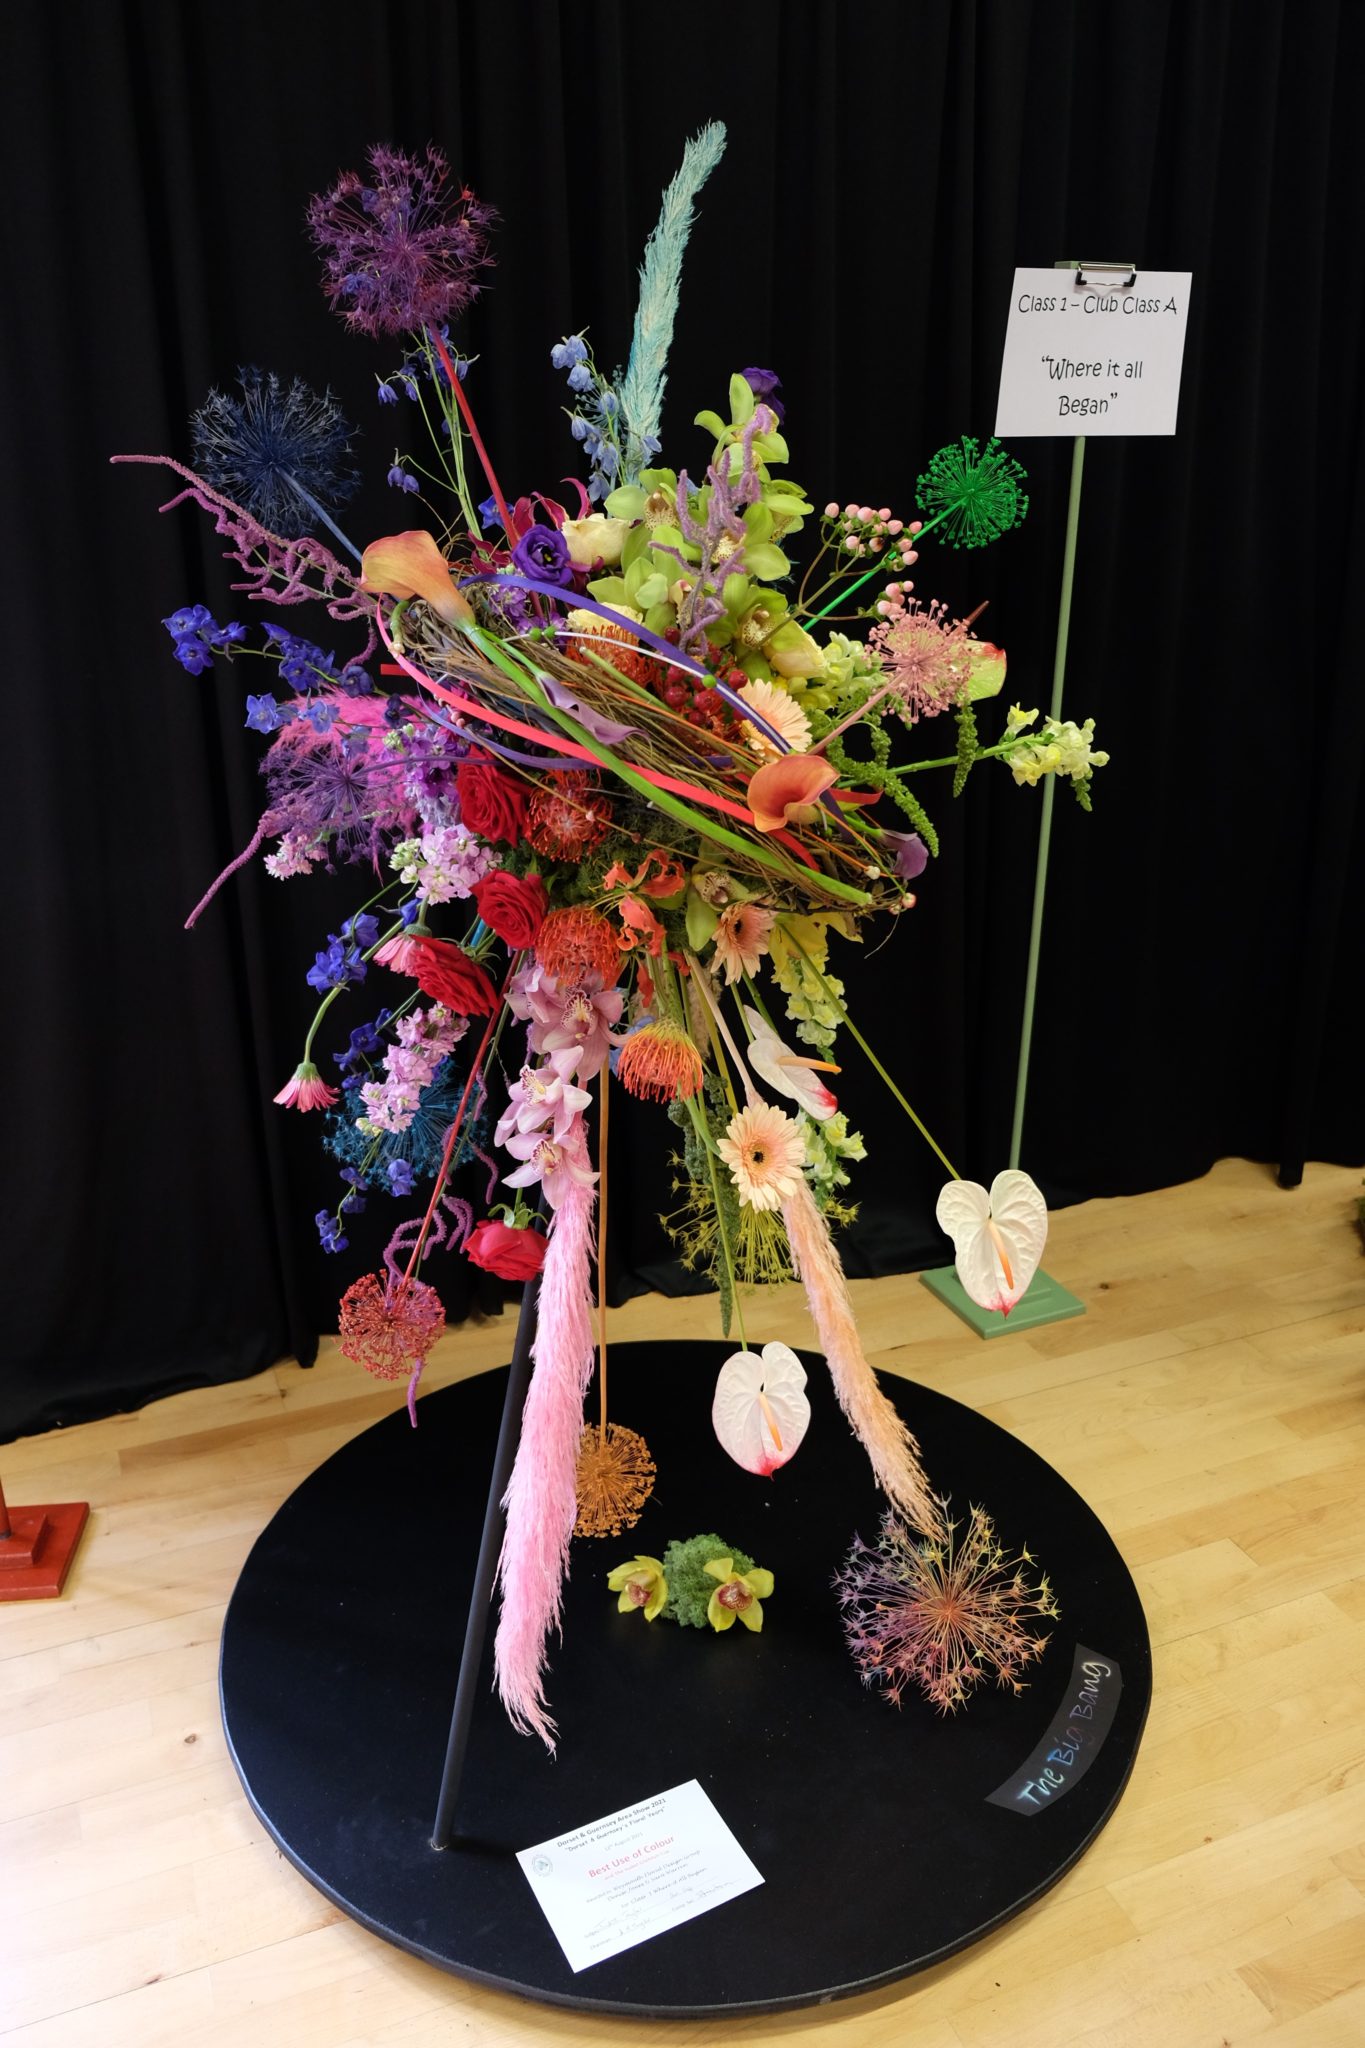 Best Use of Colour and 2nd Prize
Class 1 Where it All Began
Weymouth FDG
Denise Jones & Sara Warren